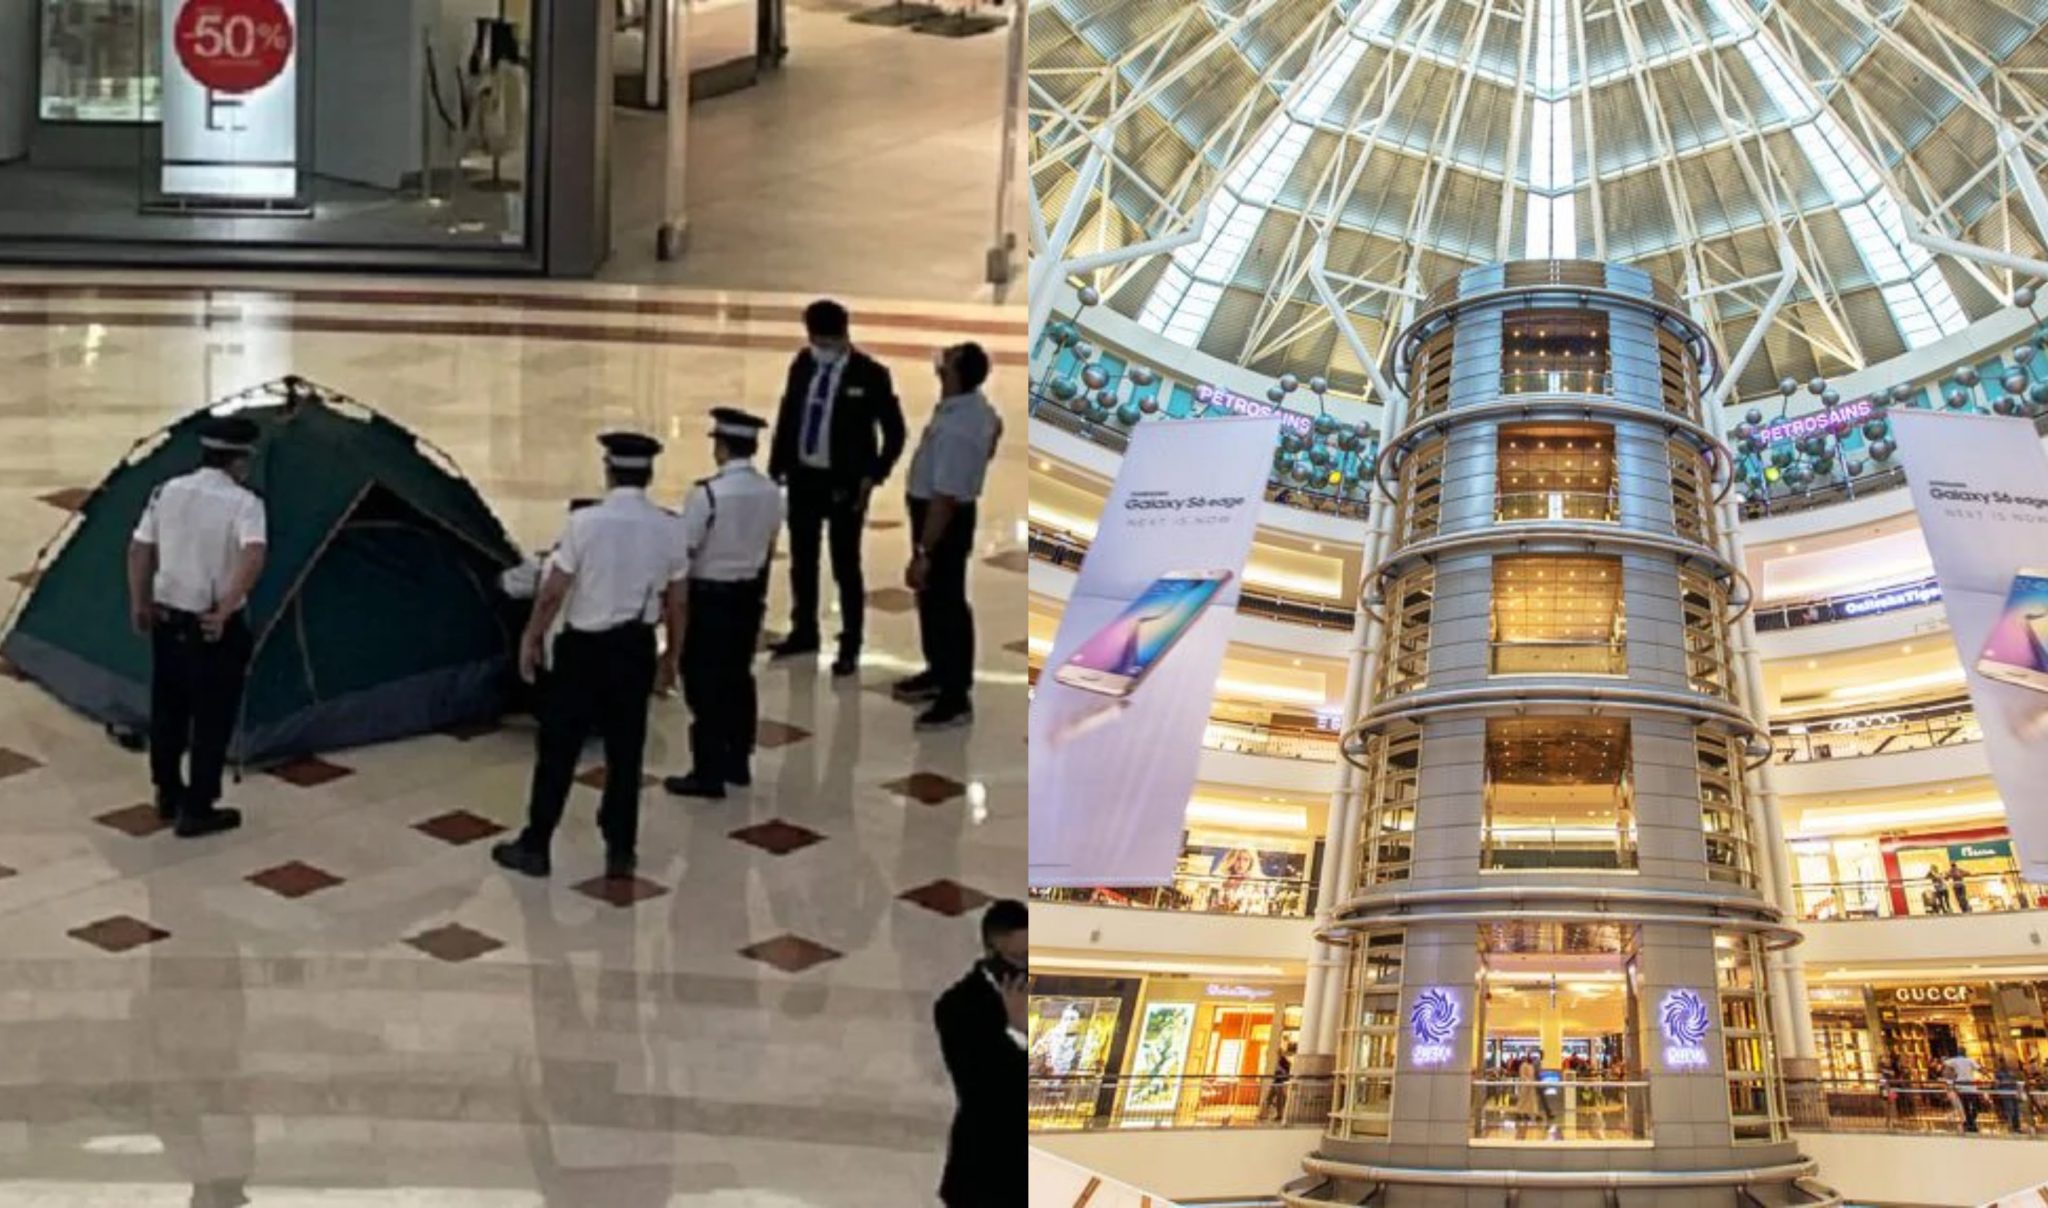 23 Year Old Woman Dies After Fall From Fourth Floor Of Suria Klcc